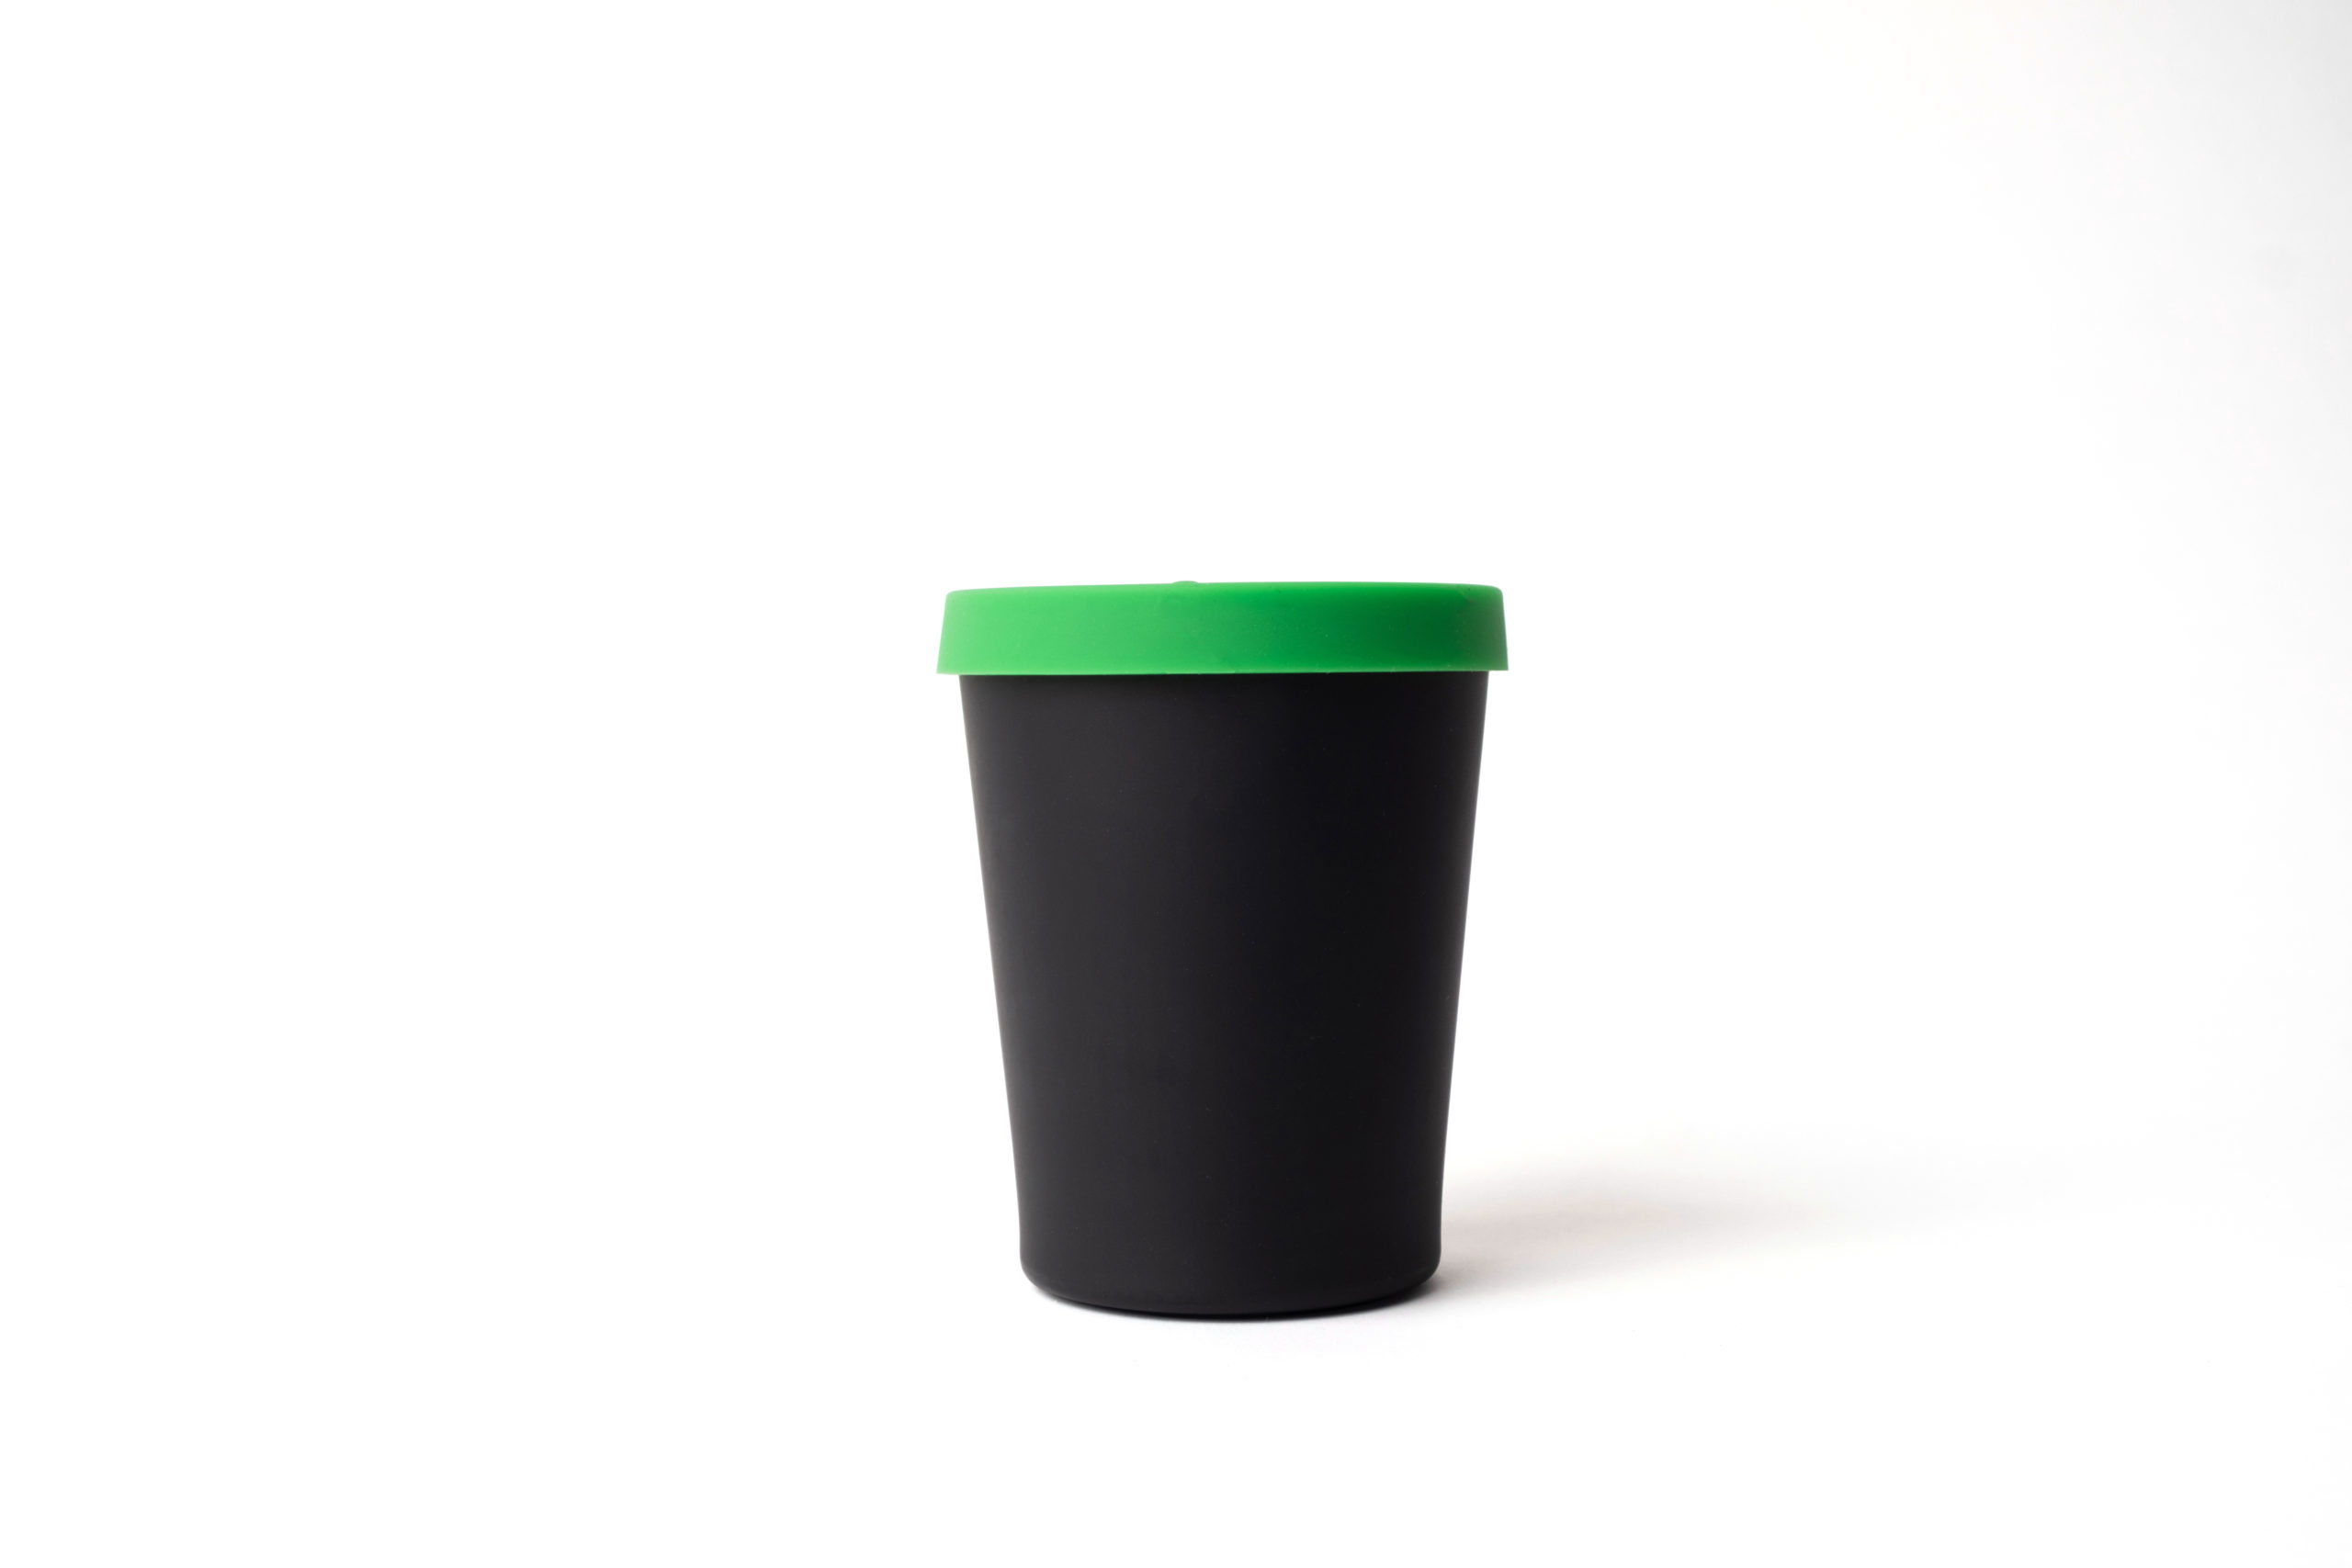 Reusable black cup (330ml) made from bamboo with green silicon lid.